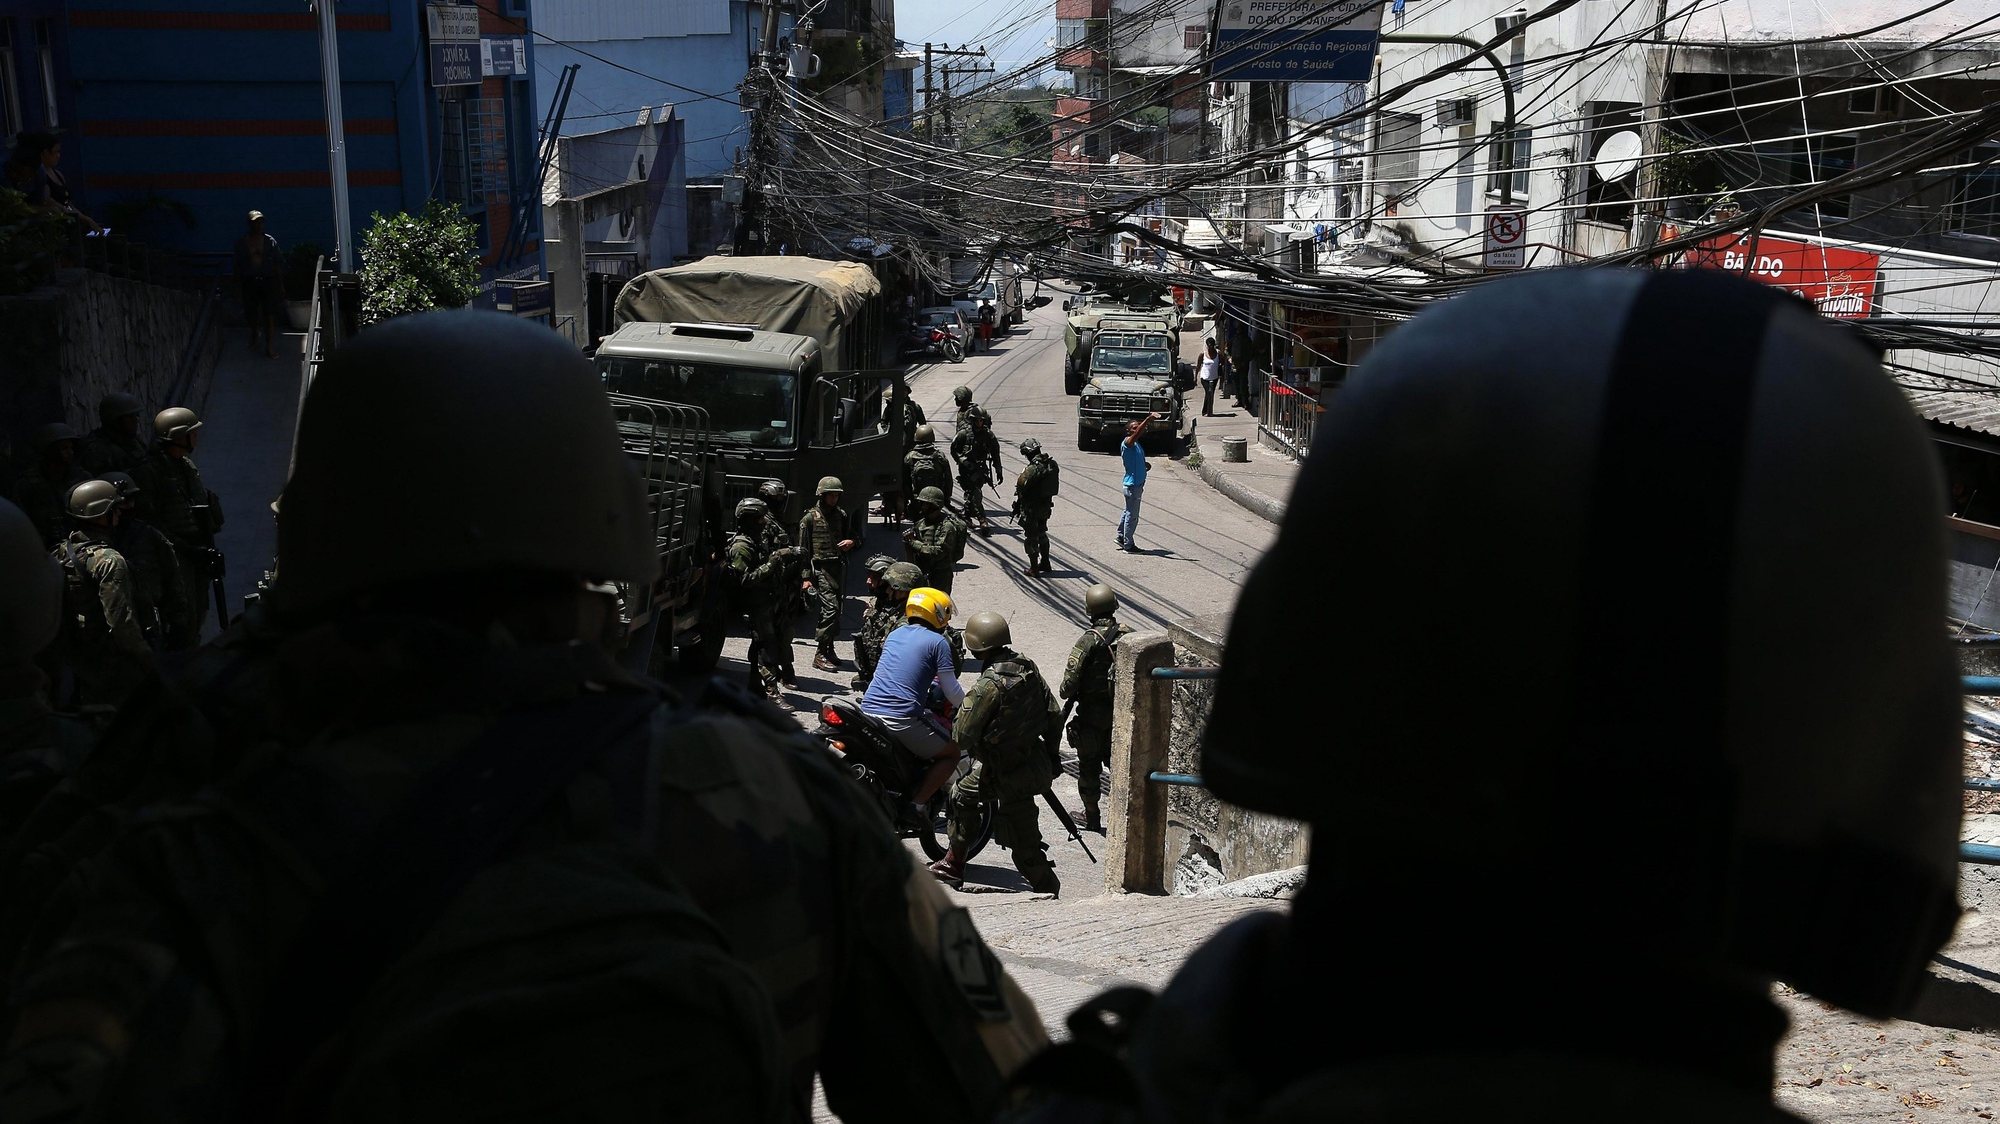 epa06257286 Soldiers of the Brazilian Army patrol a street of the favela Rocinha in Rio de Janeiro, Brazil, 10 October 2017. Soldiers are supporting a police operation in the most prominent slum of Rio de Janeiro, after they have found two bodies, allegedly of drug traffickers.  EPA/MARCELO SAYAO